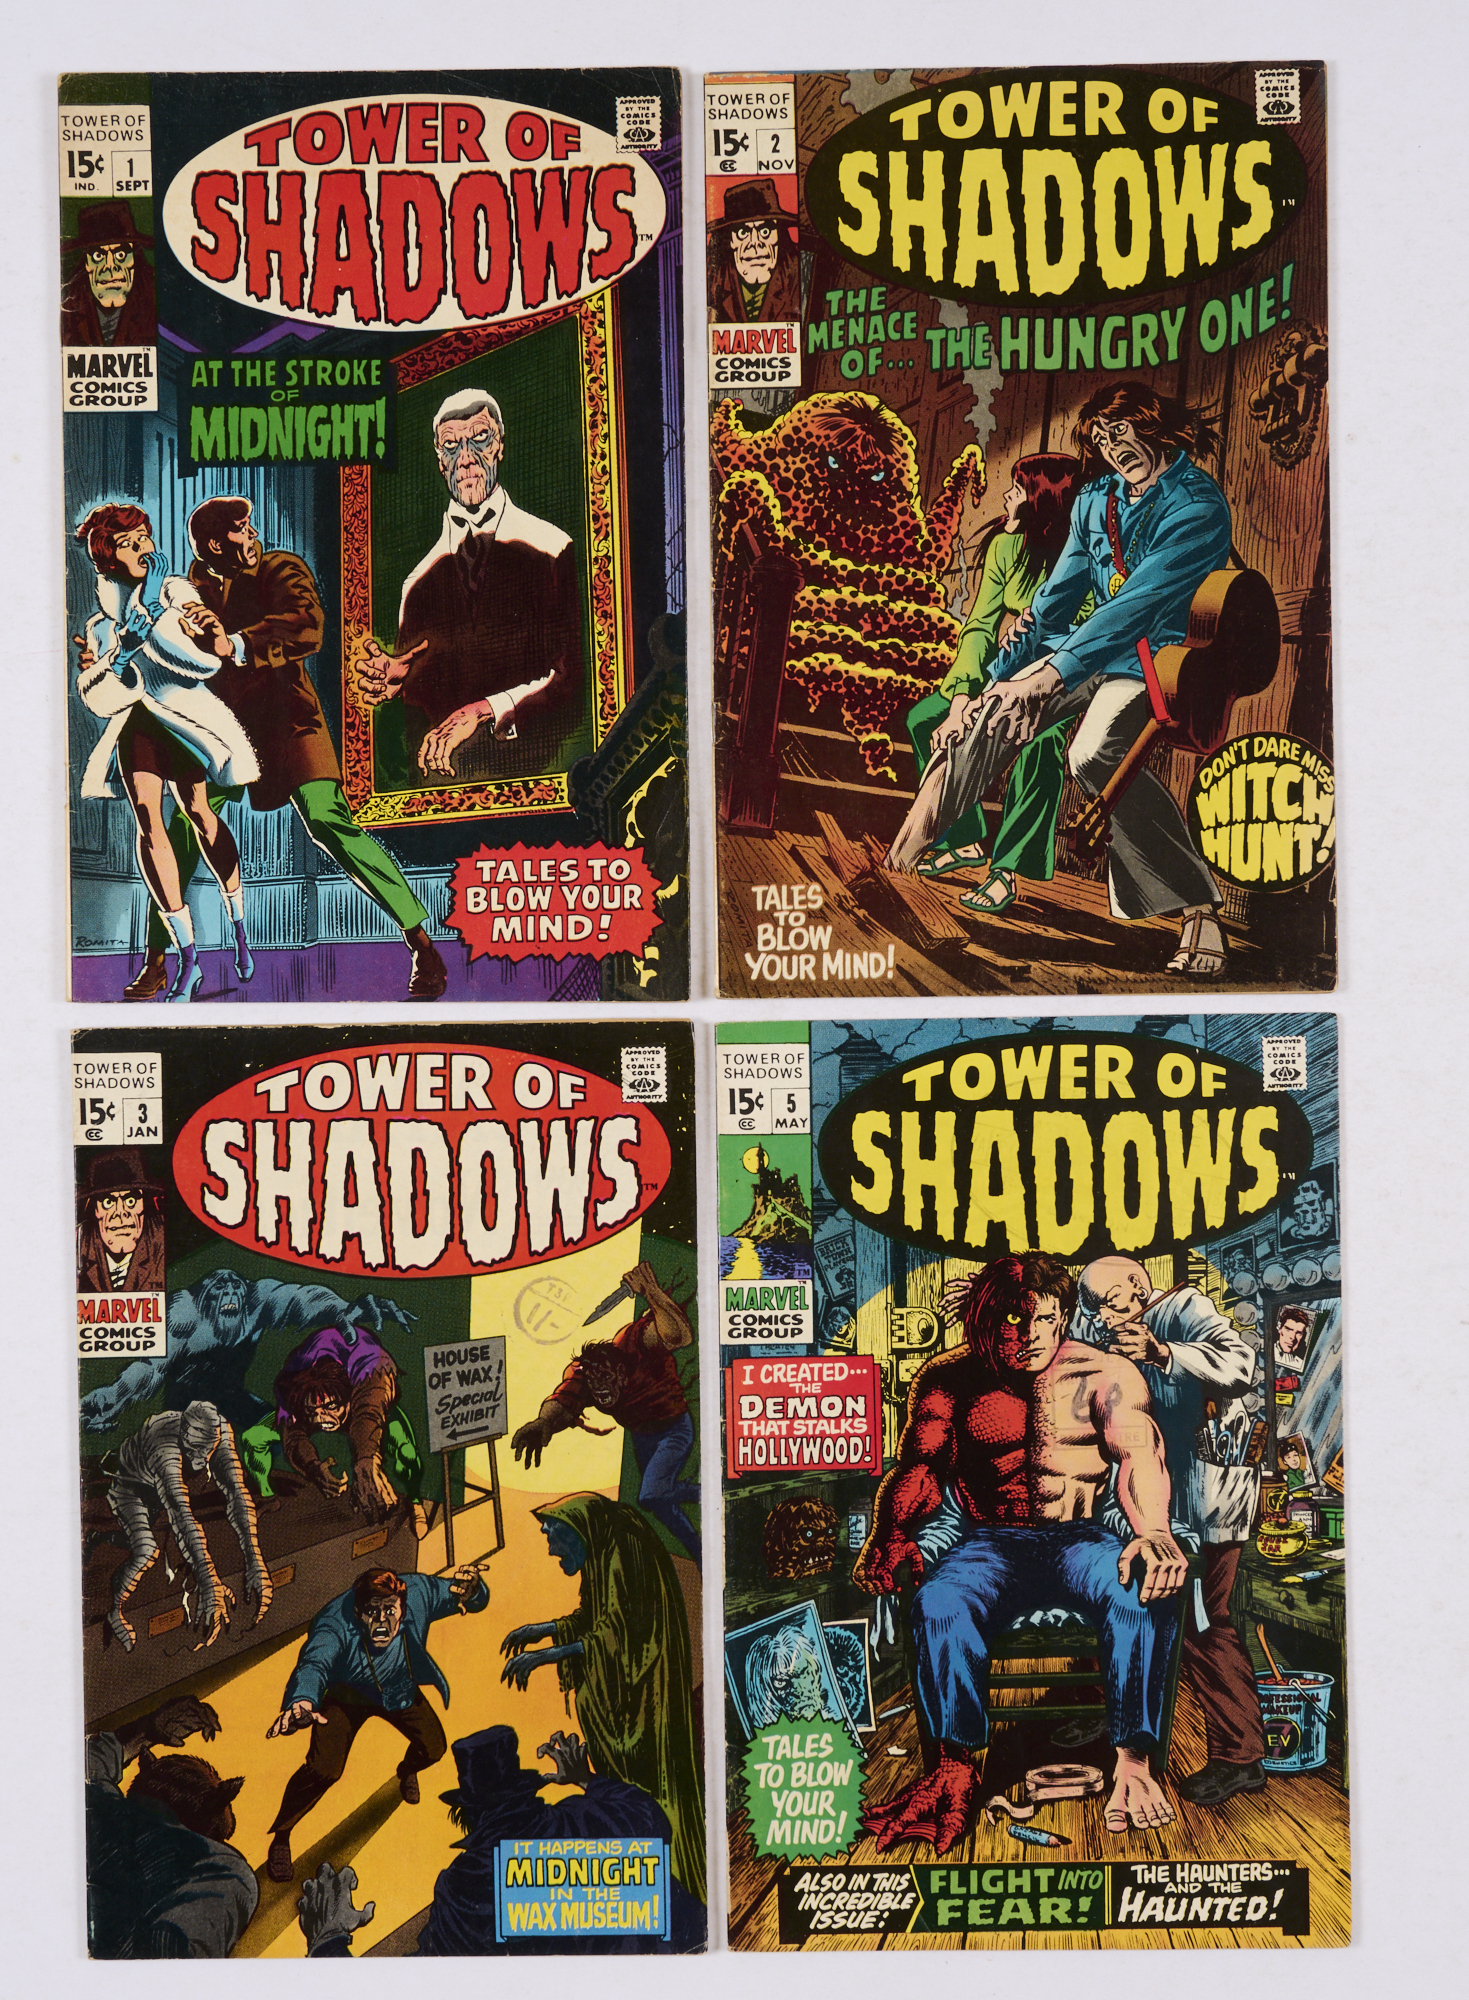 Tower of Shadows (1969-70) 1-3, 5 (# 1, 2 cents copies) [fn/vg/fn-/vg+] (4). No Reserve